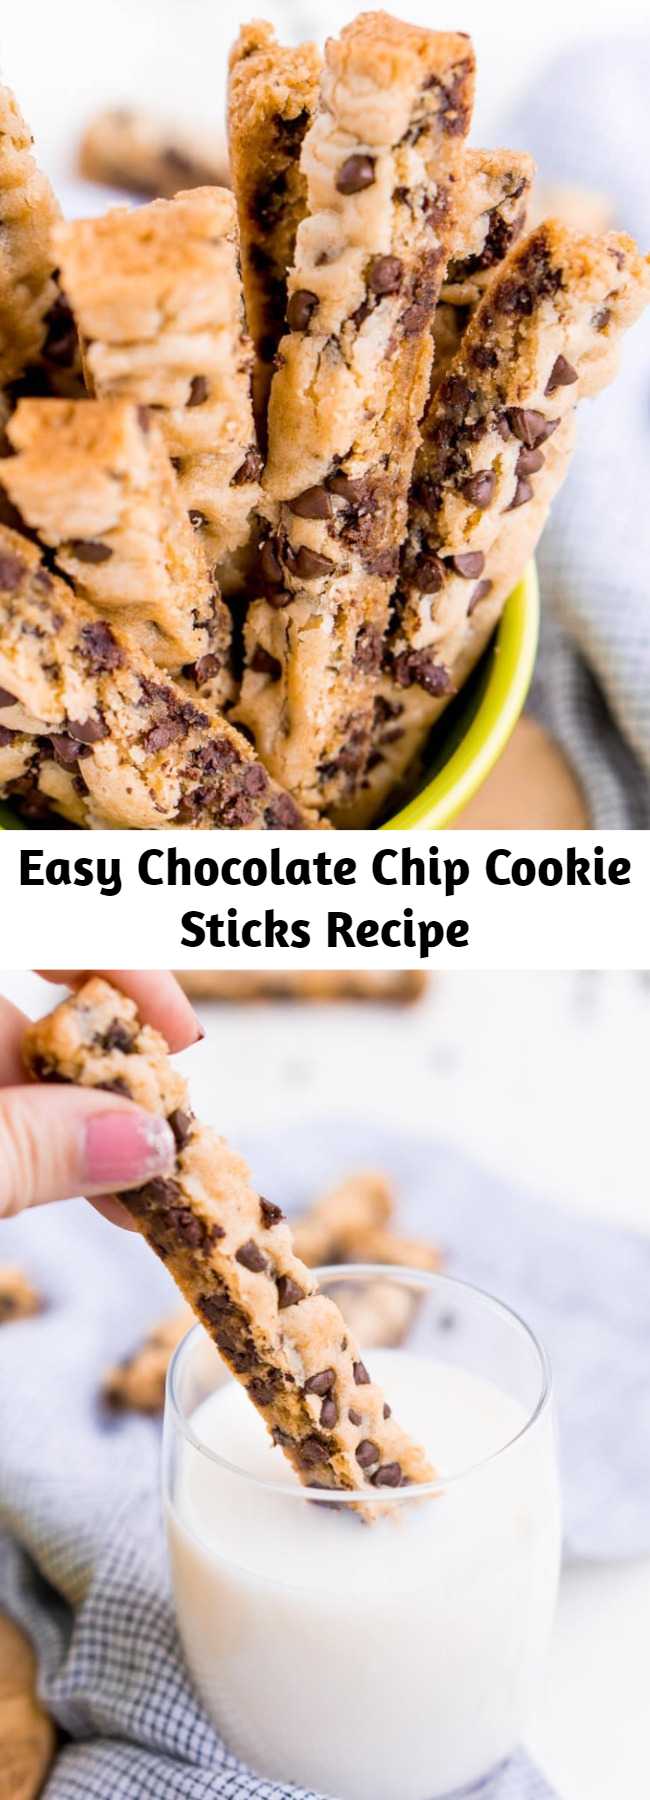 Easy Chocolate Chip Cookie Sticks Recipe - These Chocolate Chip Cookie Sticks are perfect for dunking! A thick, slightly crisp, yet still chewy cookie loaded with mini chocolate chips and made in a 9 x 13-inch pan for easy baking!